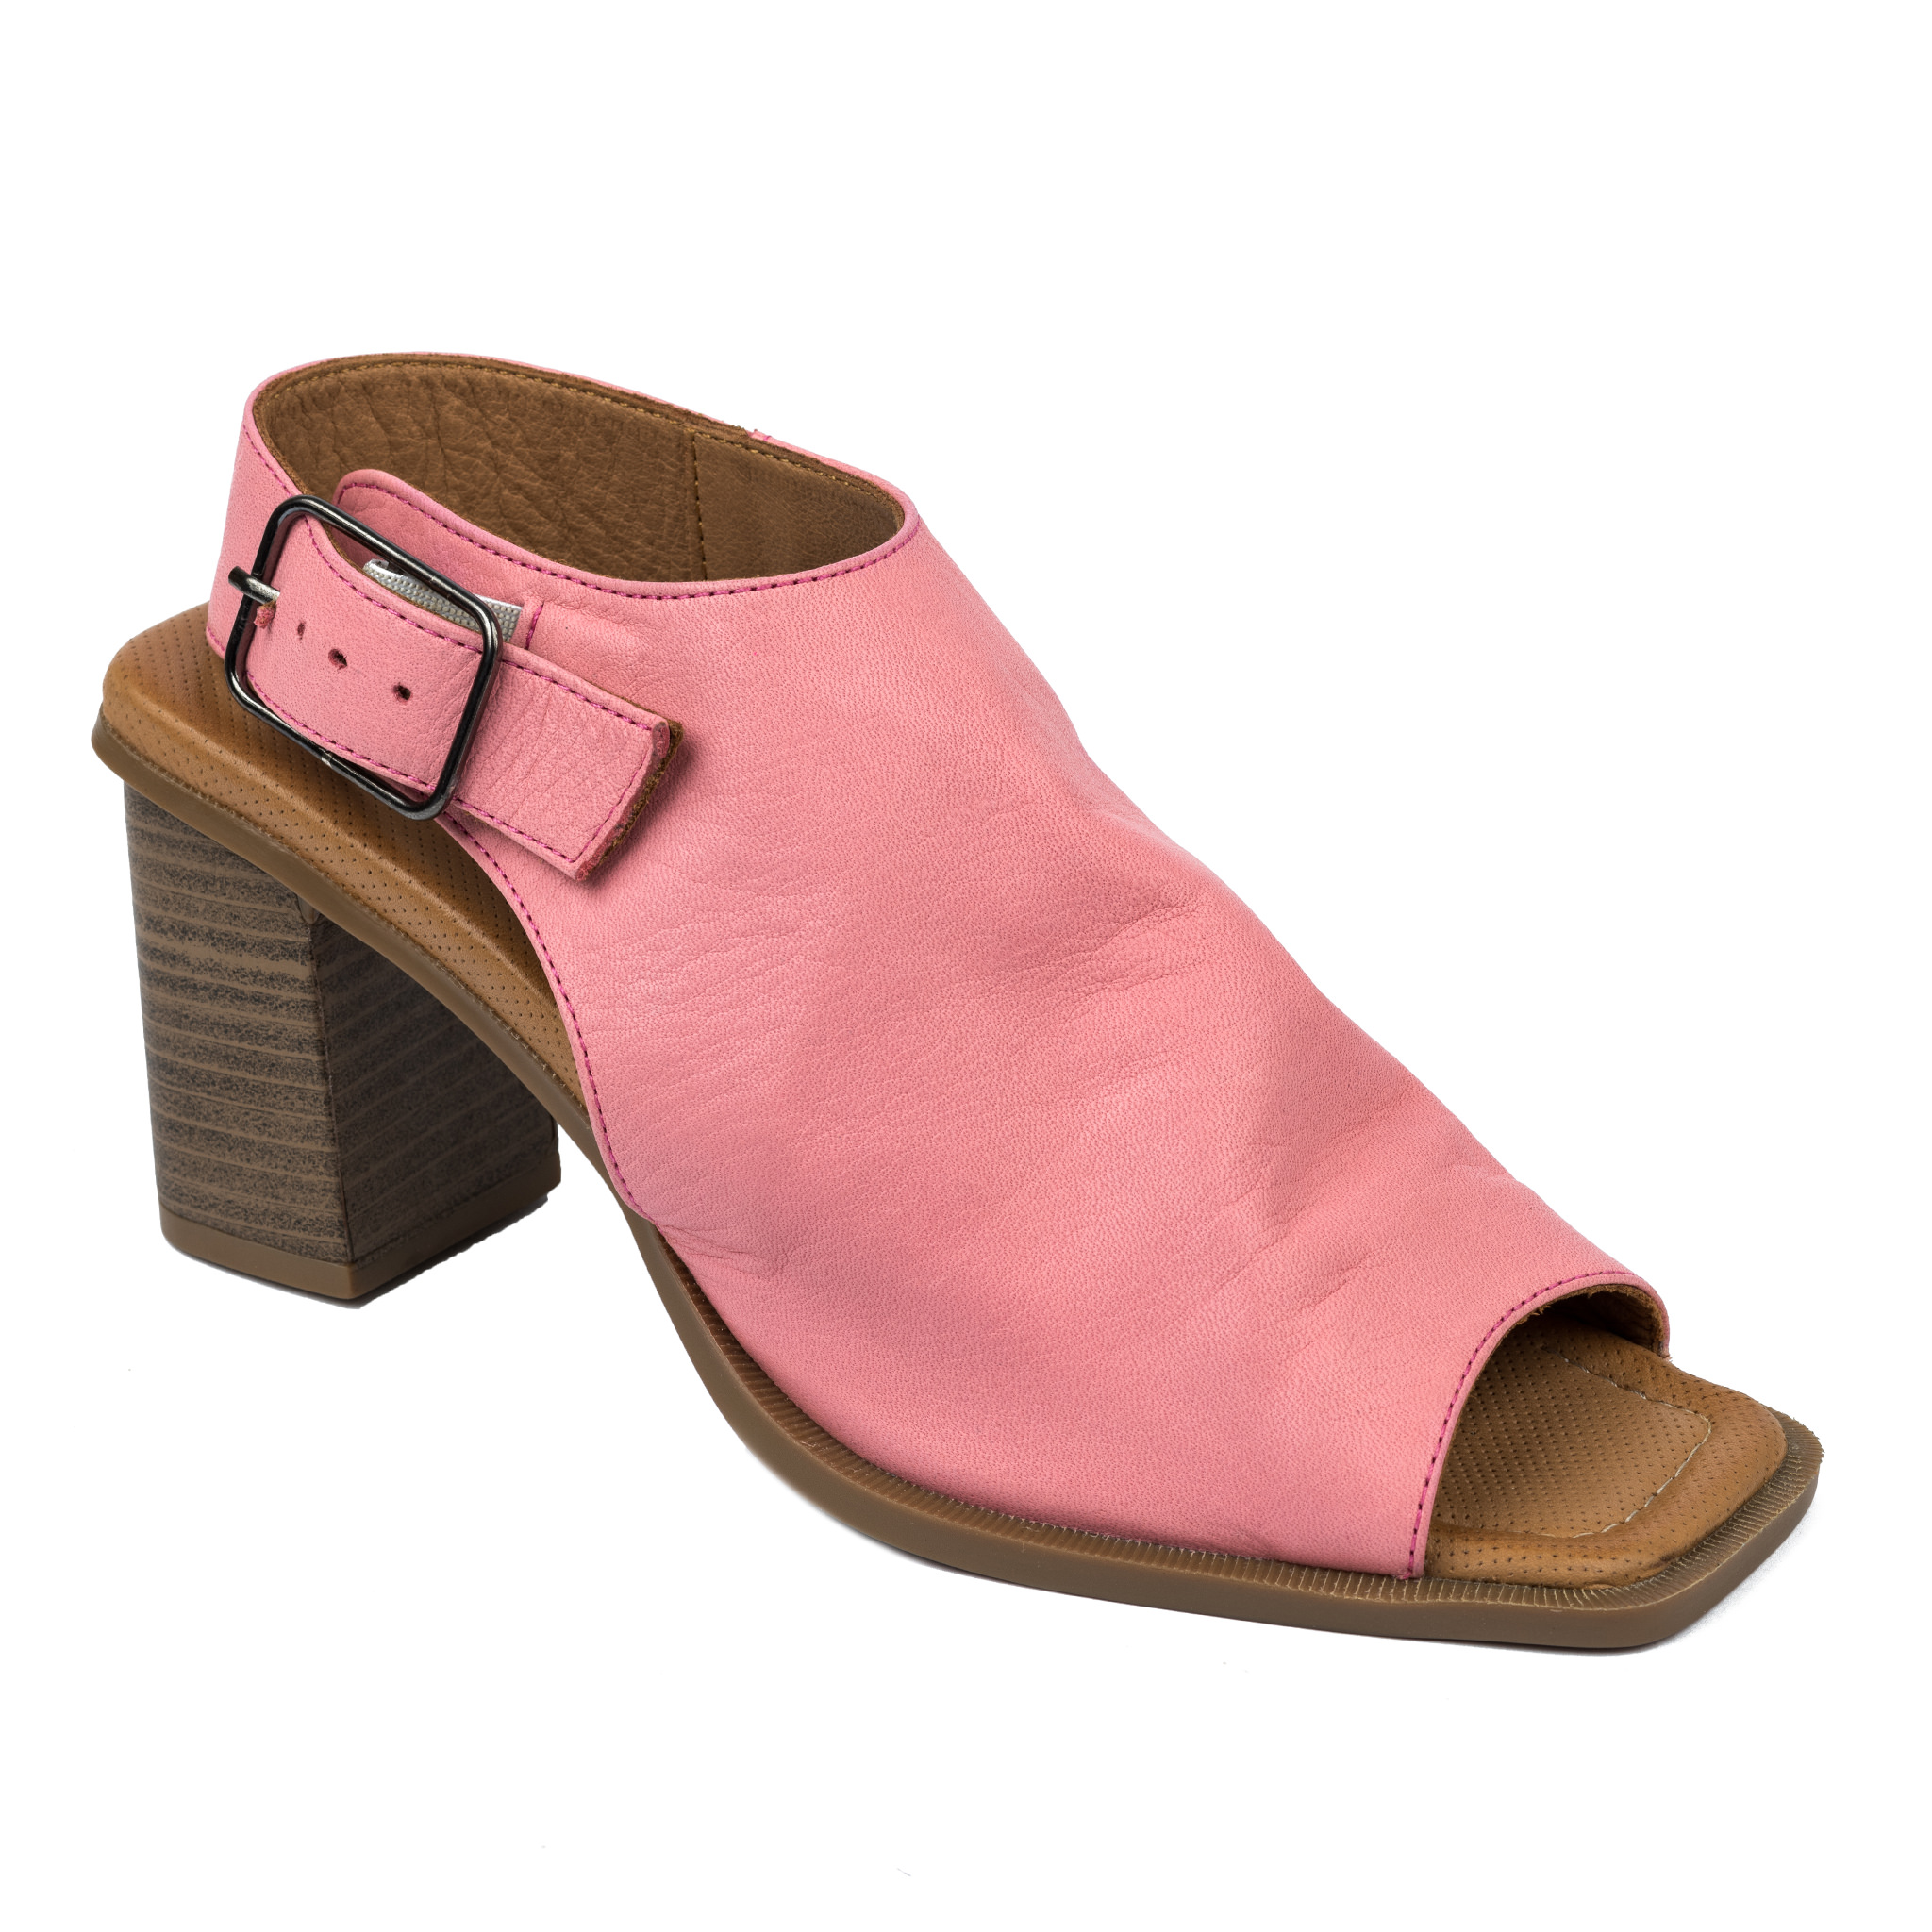 Leather sandals A676 - ROSE